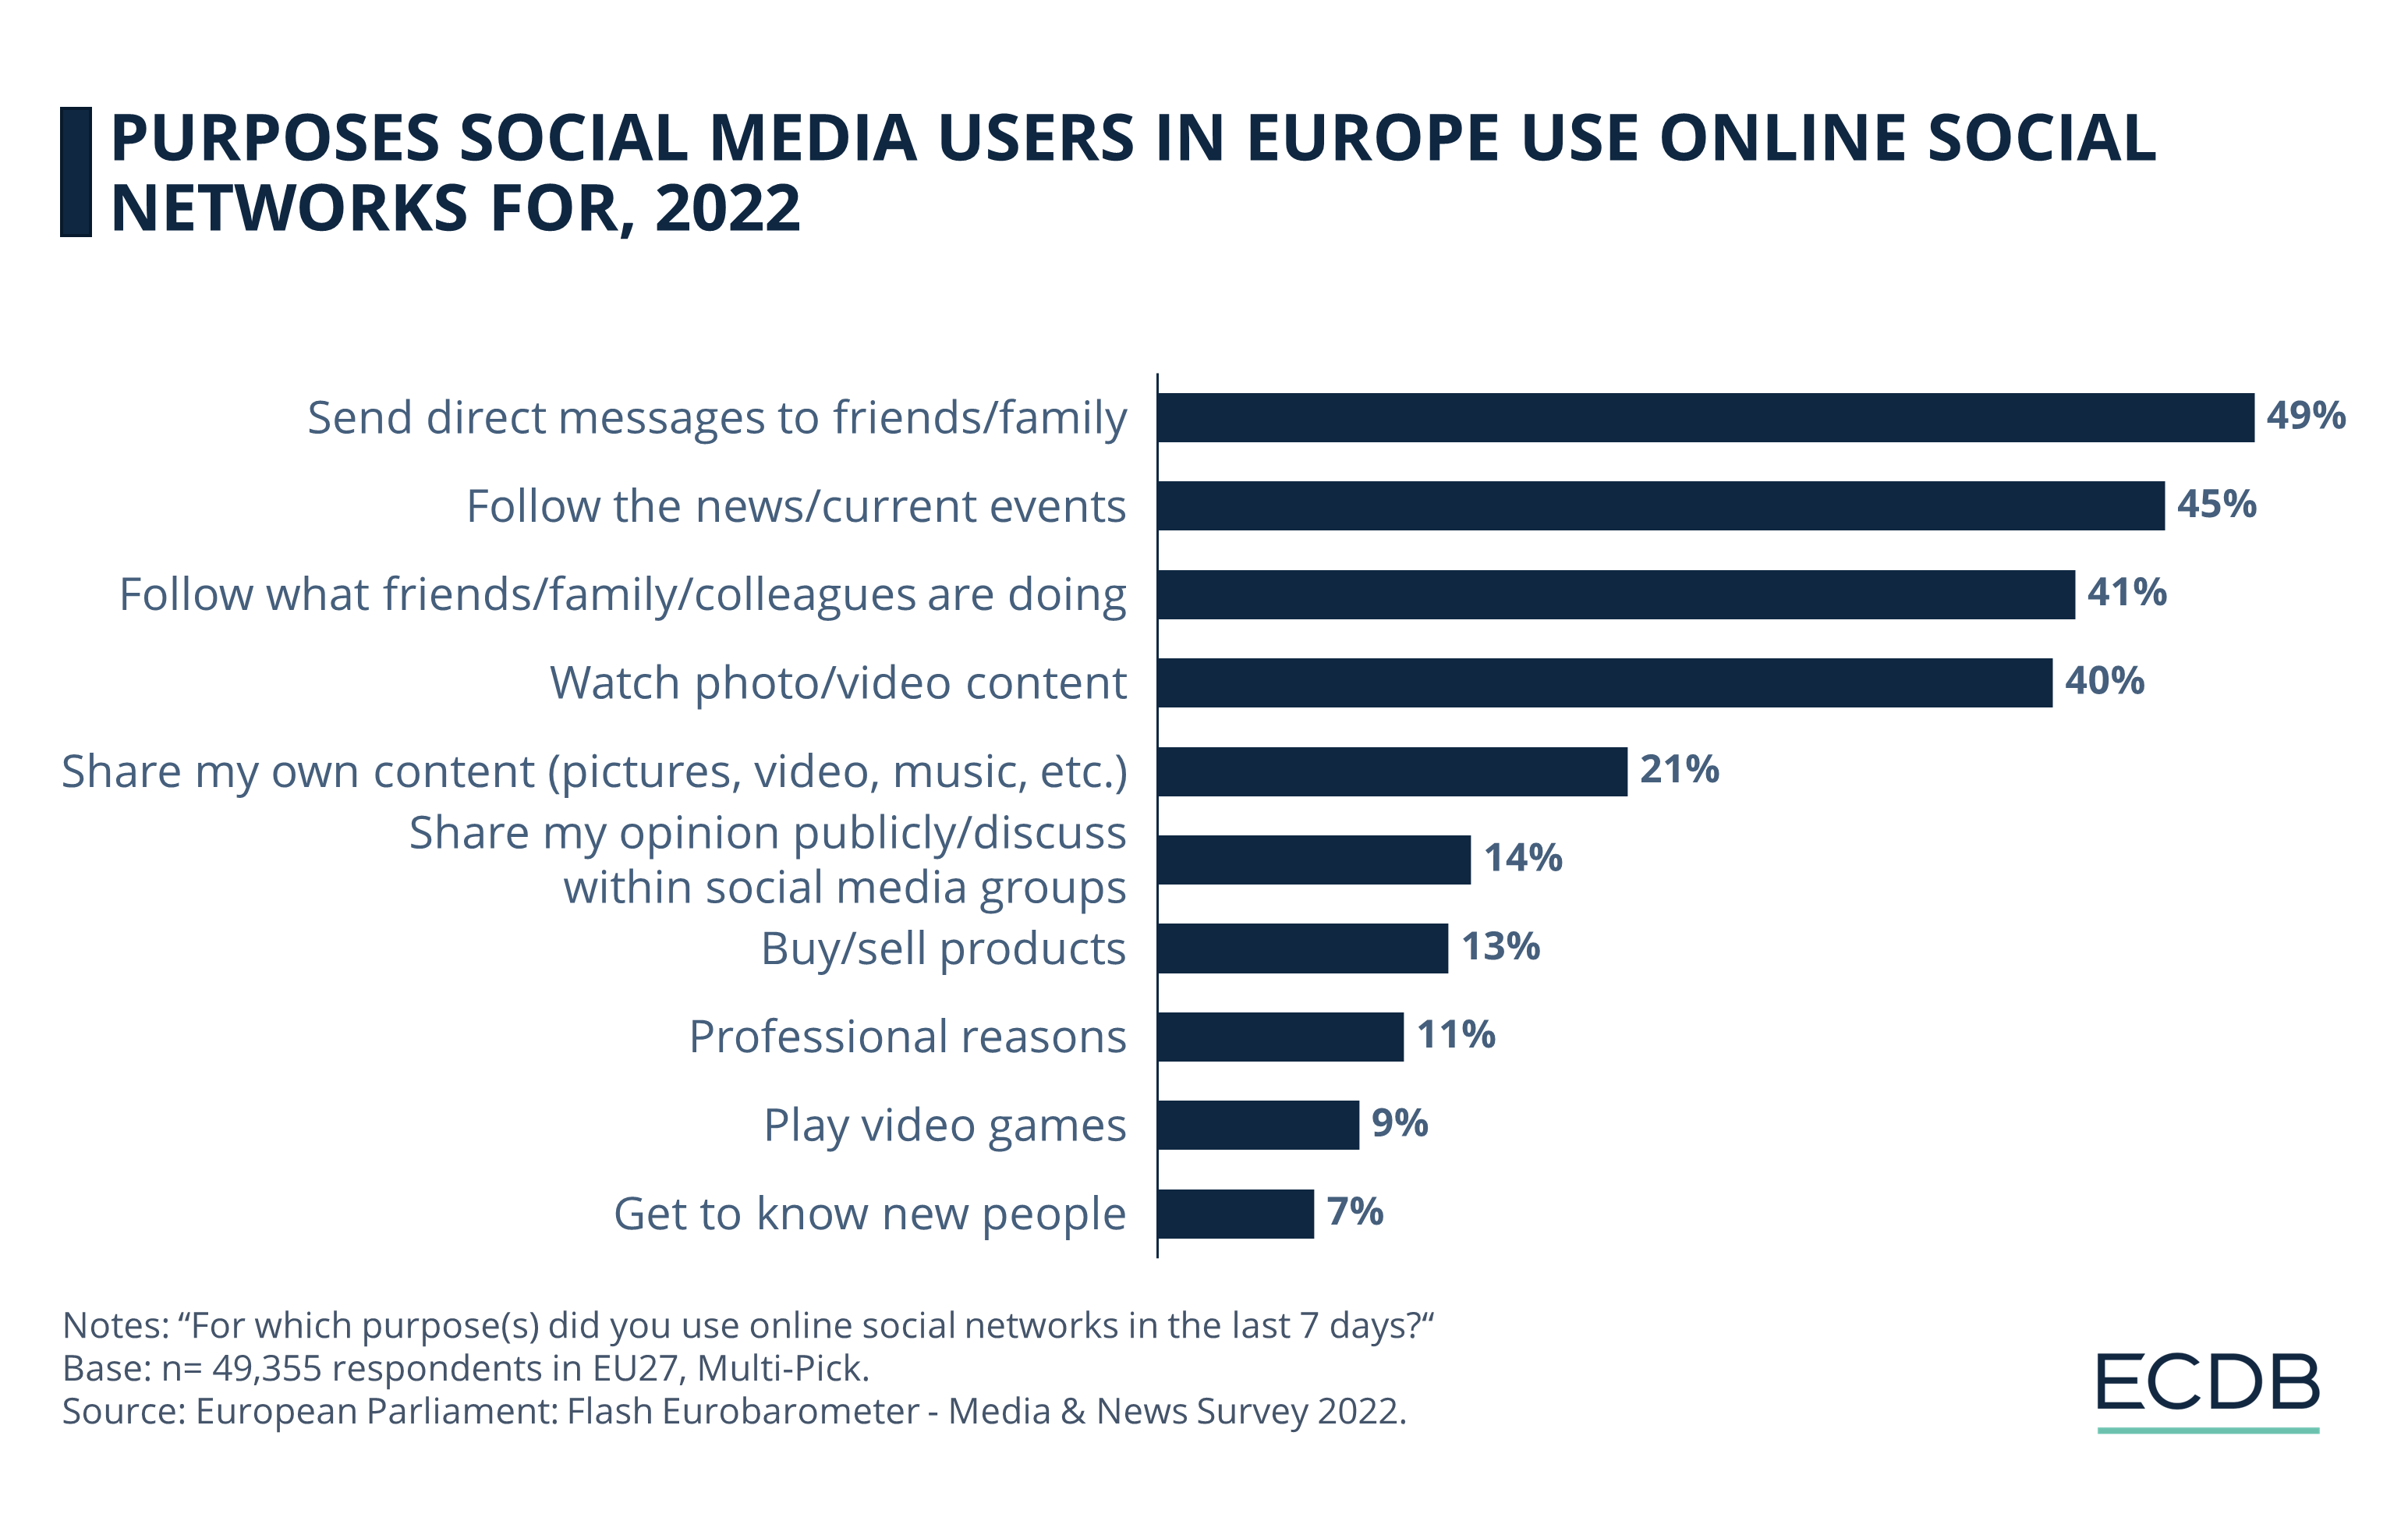 Purposes Social Media Users in Europe Use Online Social Networks for, 2022